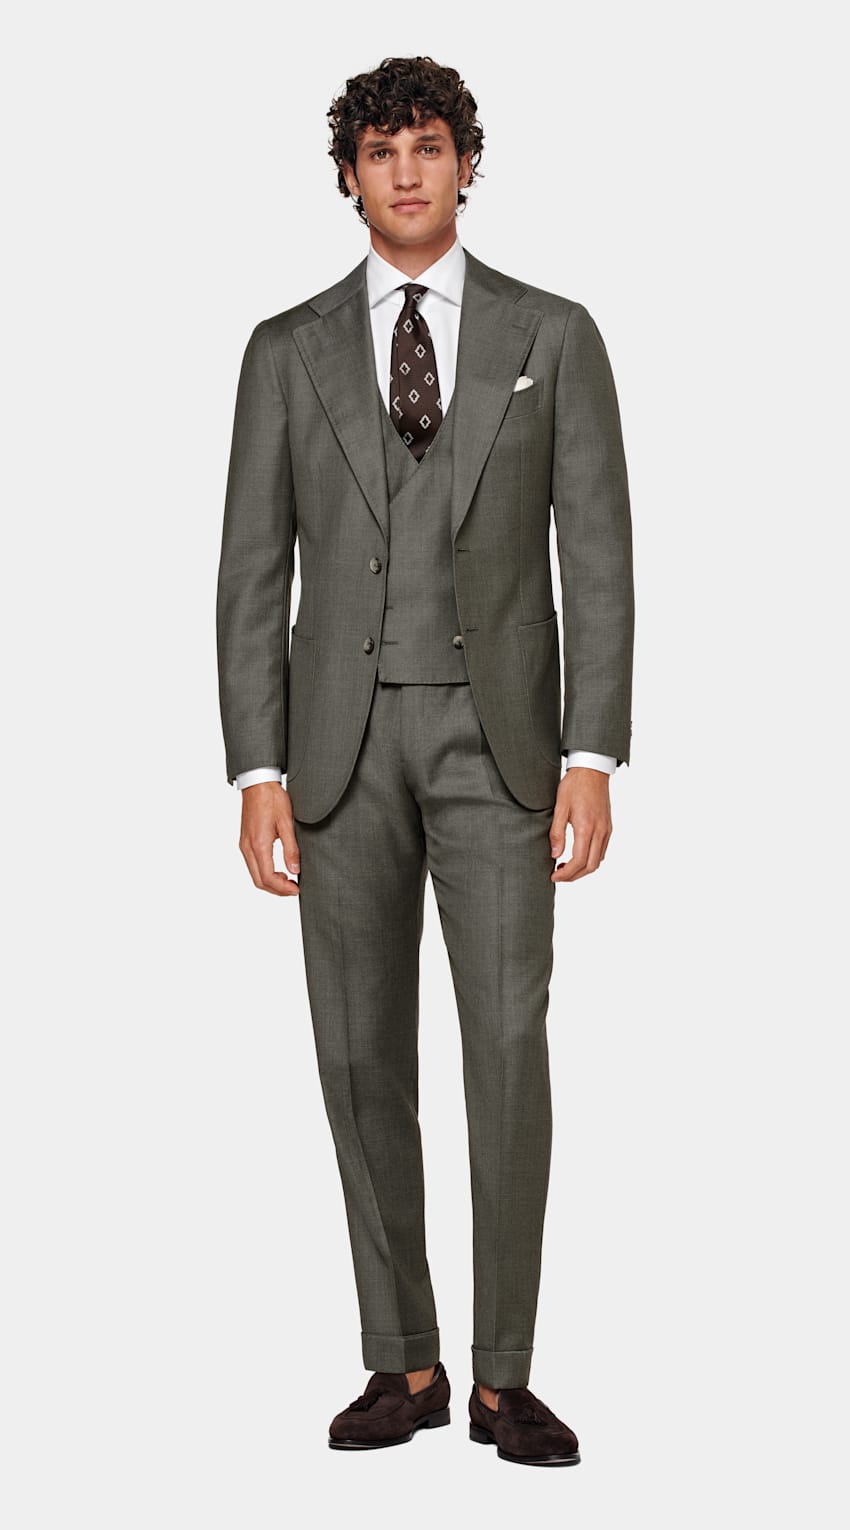 SUITSUPPLY Pure S110's Wool by Vitale Barberis Canonico, Italy Dark Green Three-Piece Tailored Fit Havana Suit